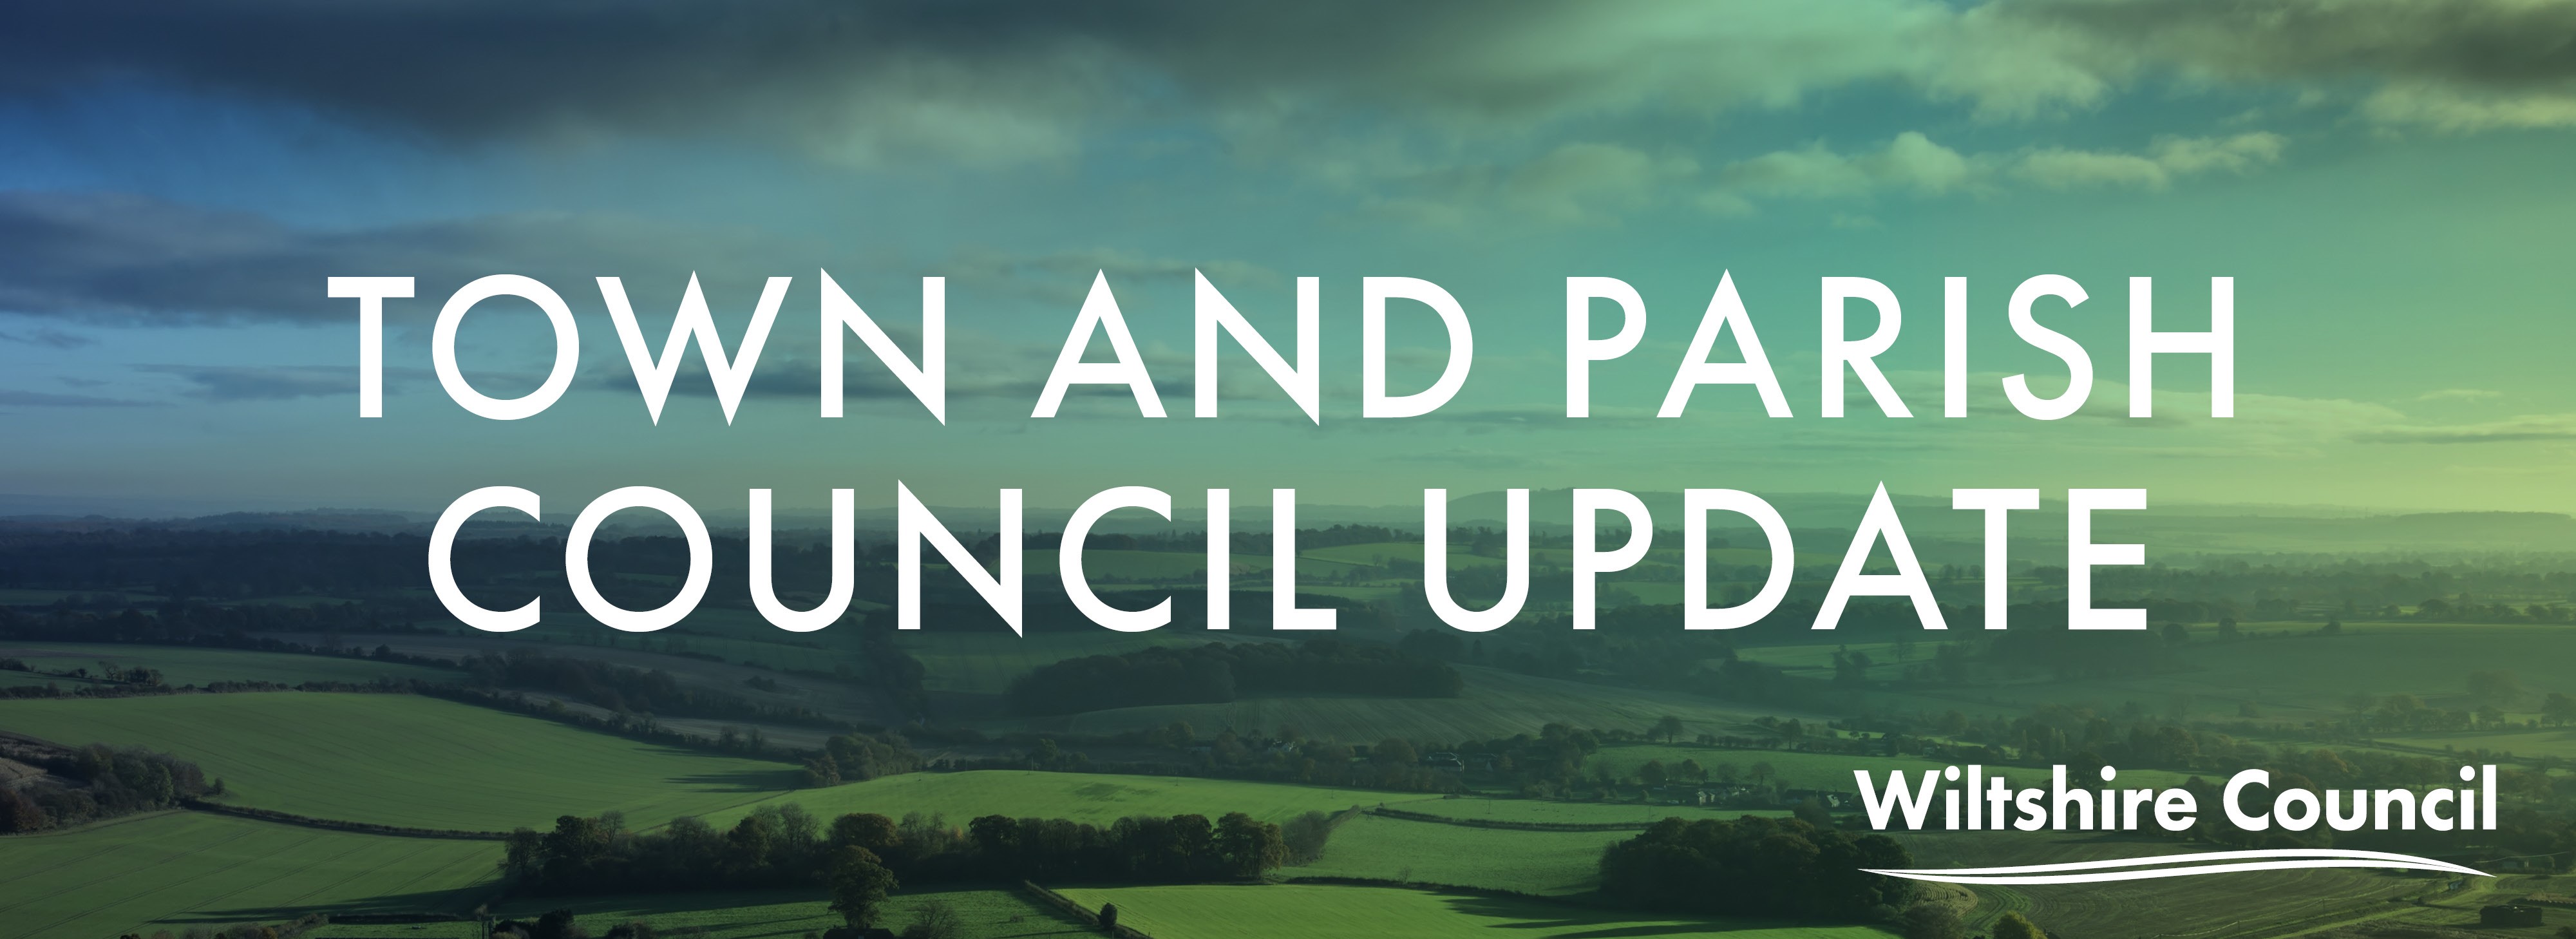 Town & Parish Council Update from Wiltshire Council - Coronation and Events 